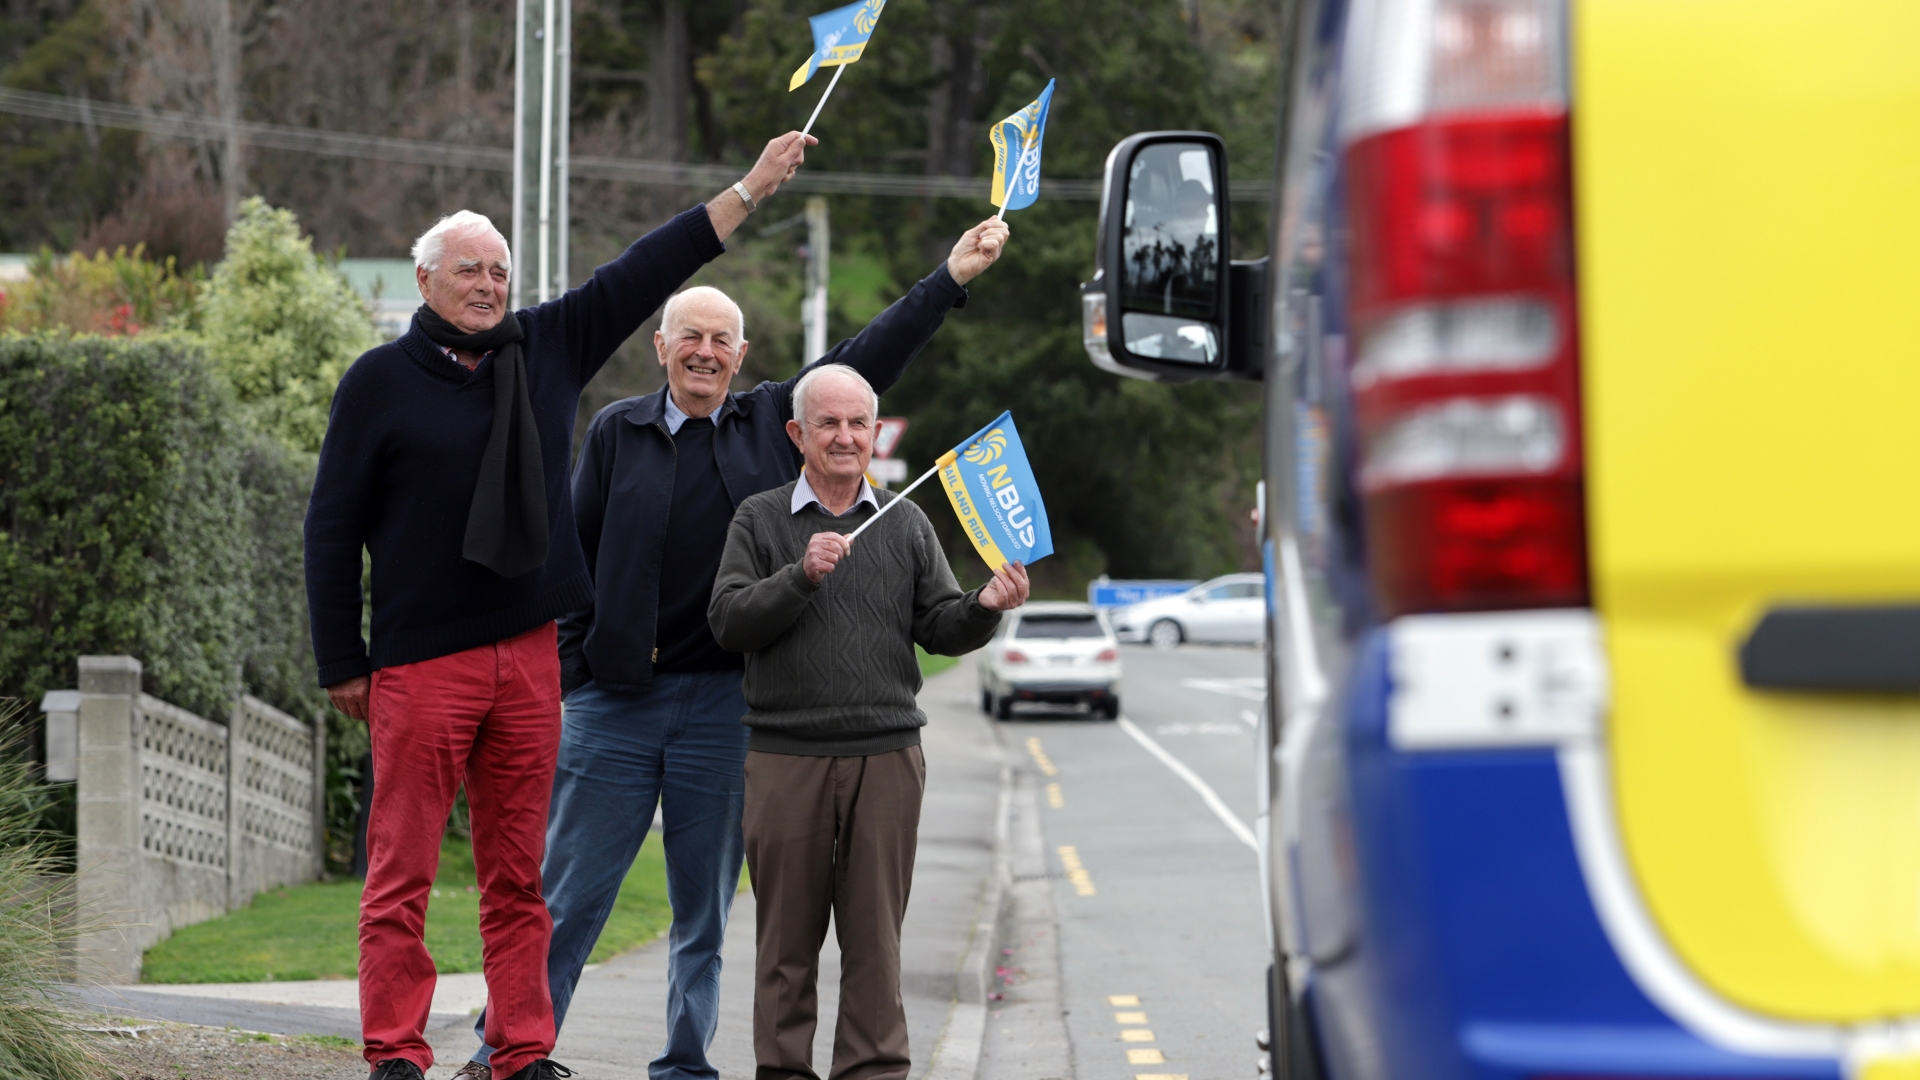 Greypower representatives, Bob Hancock (pictured middle) and George Truman (right) and Deputy Mayor Paul Matheson (left) flag down the bus on the Stoke Loop.